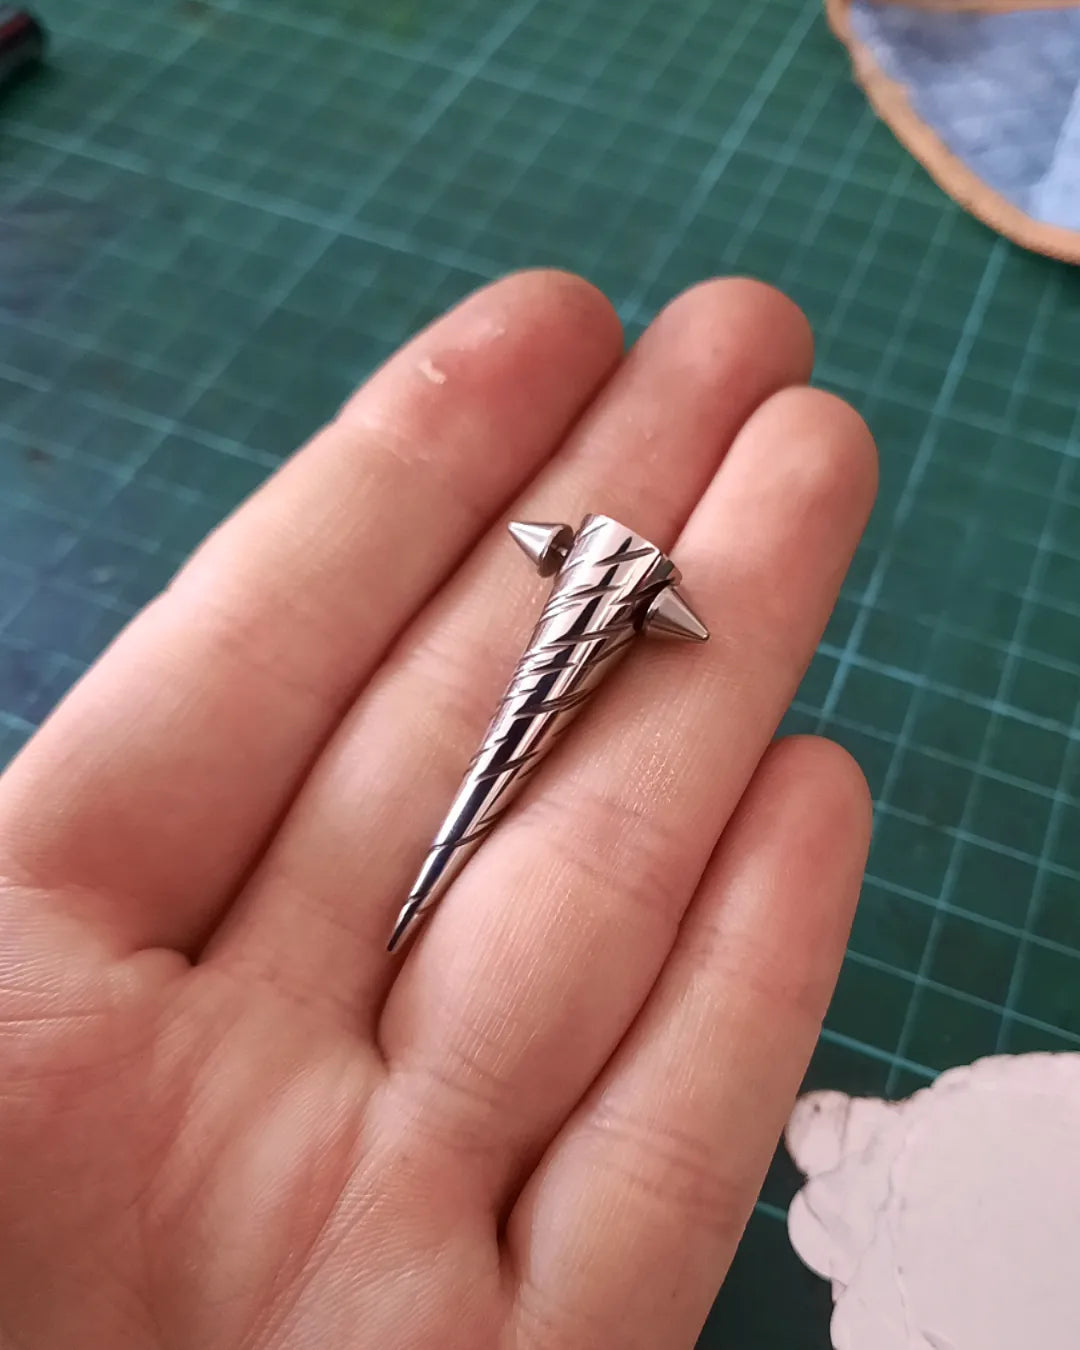 Micro Spiko! Tiny spikes for loc/dreadlock tips in brass and stainless steel